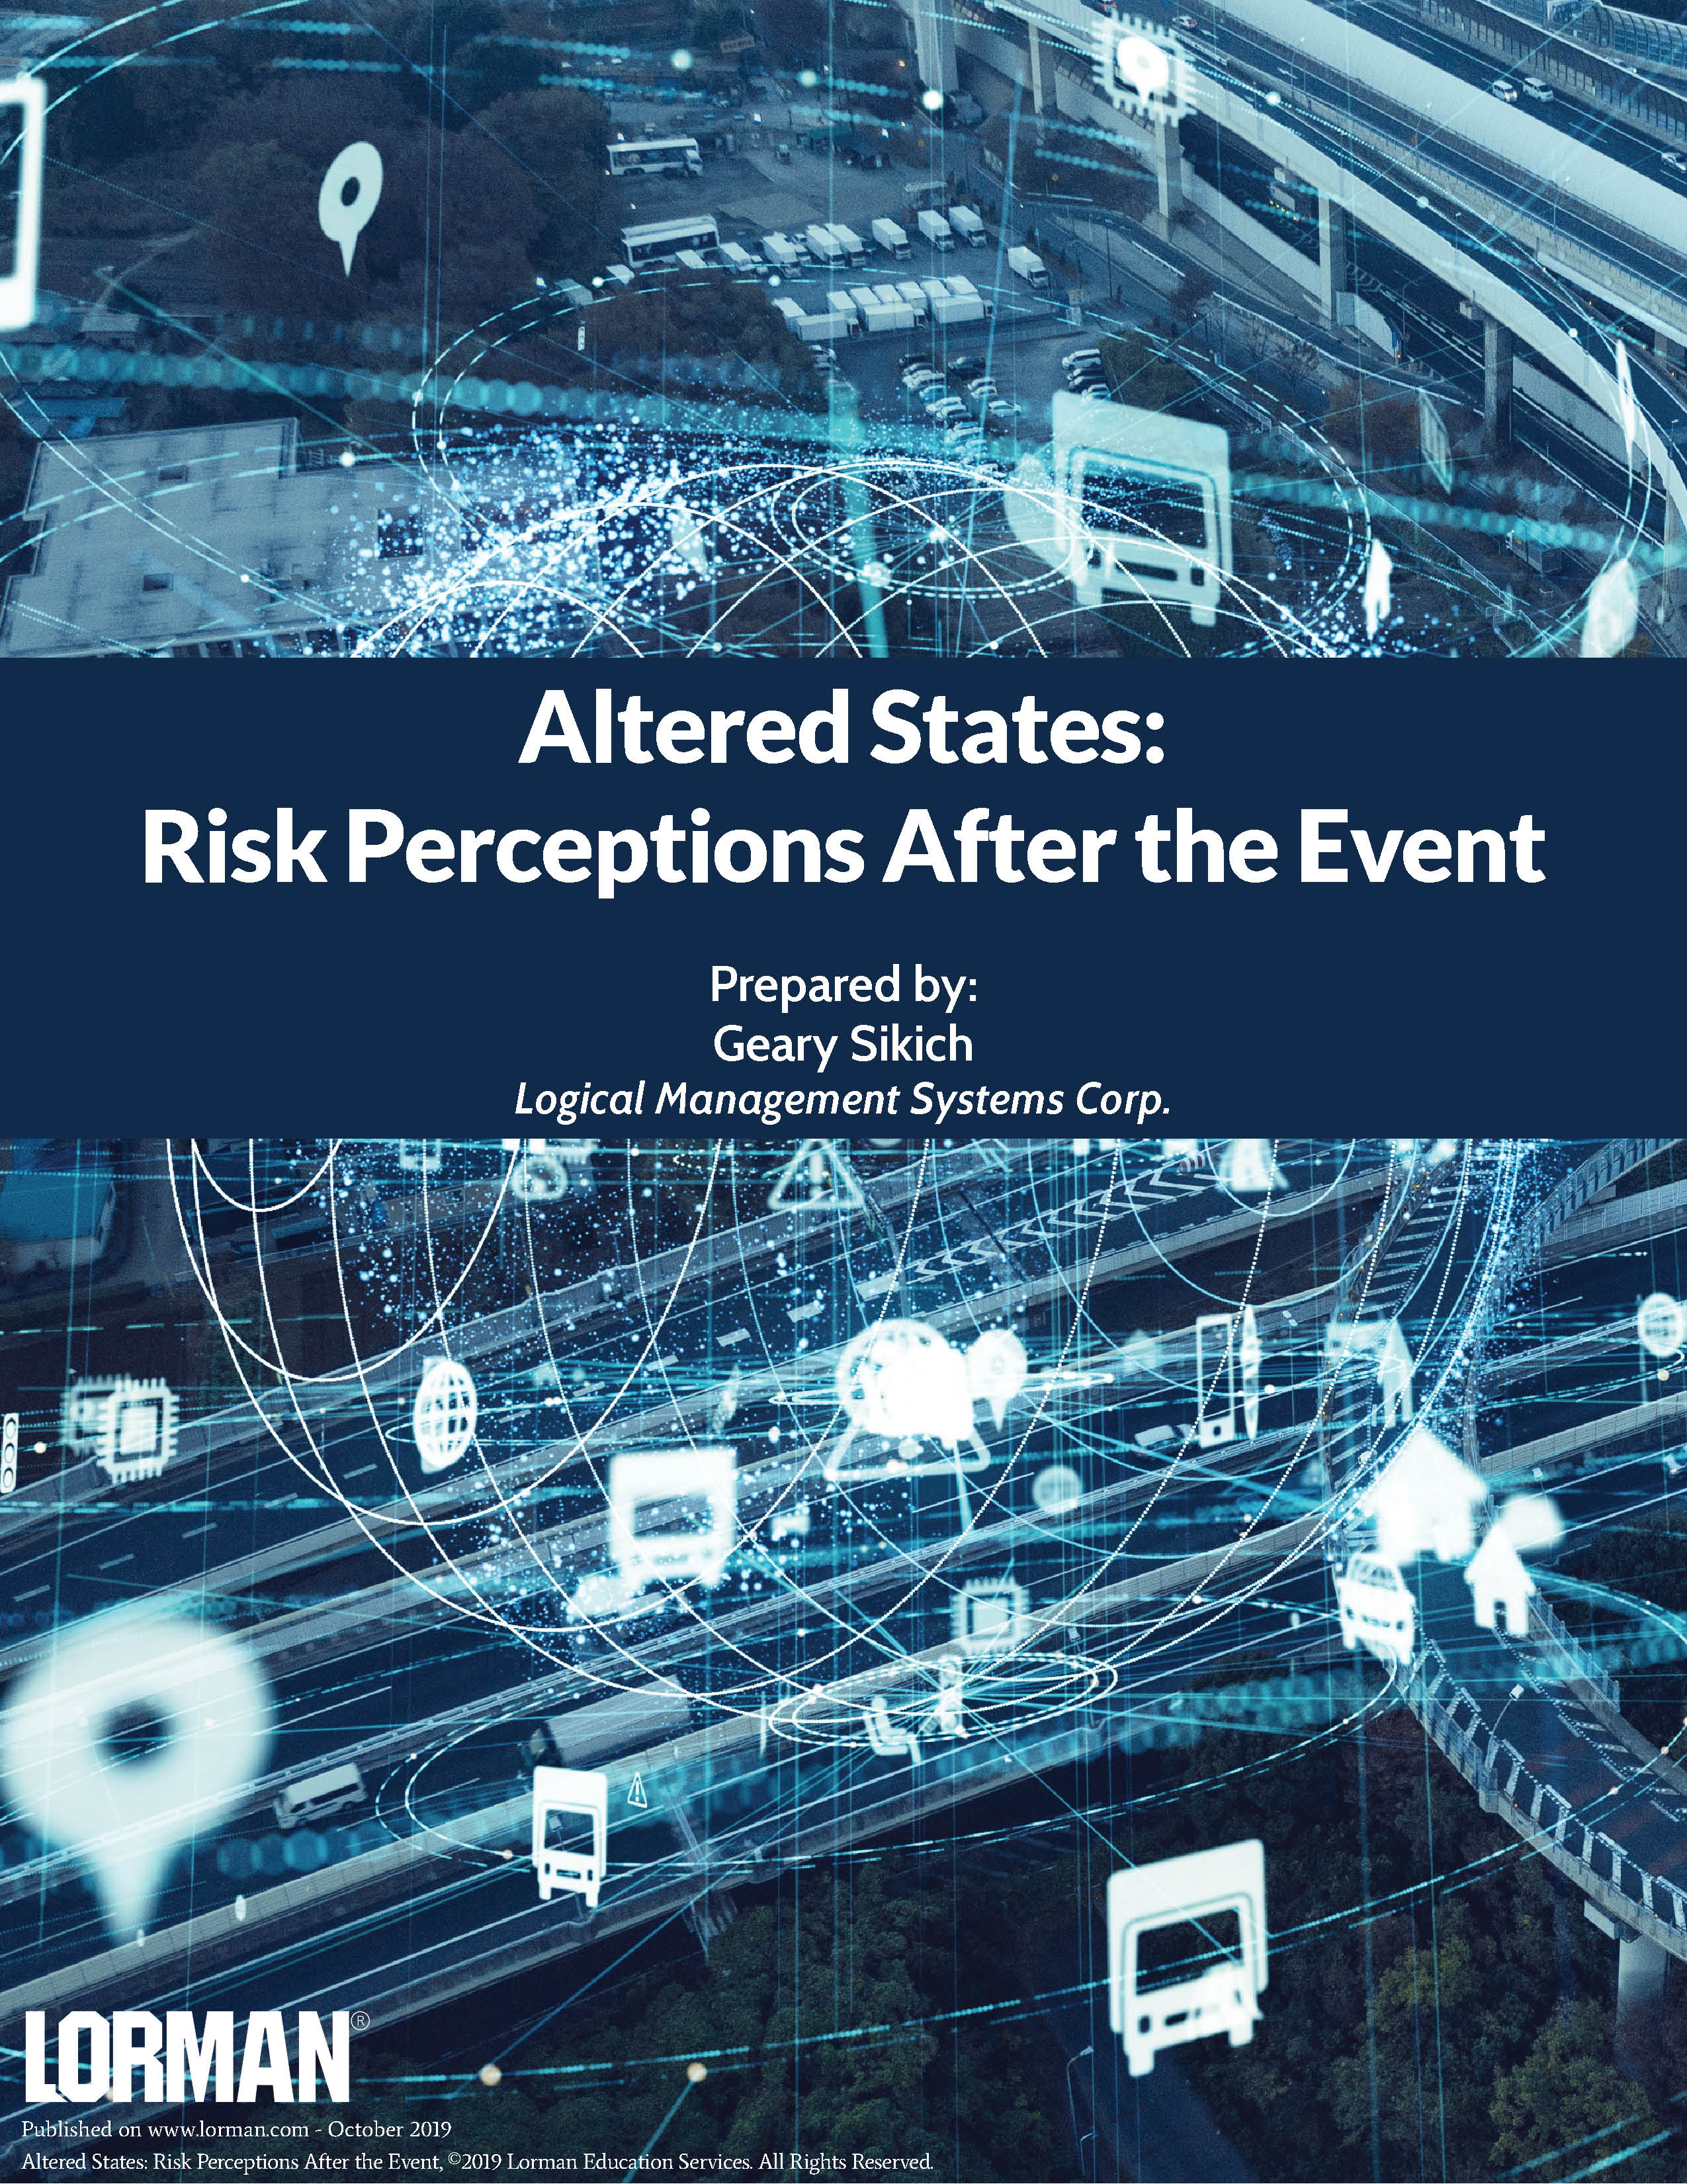 Altered States: Risk Perceptions After the Event